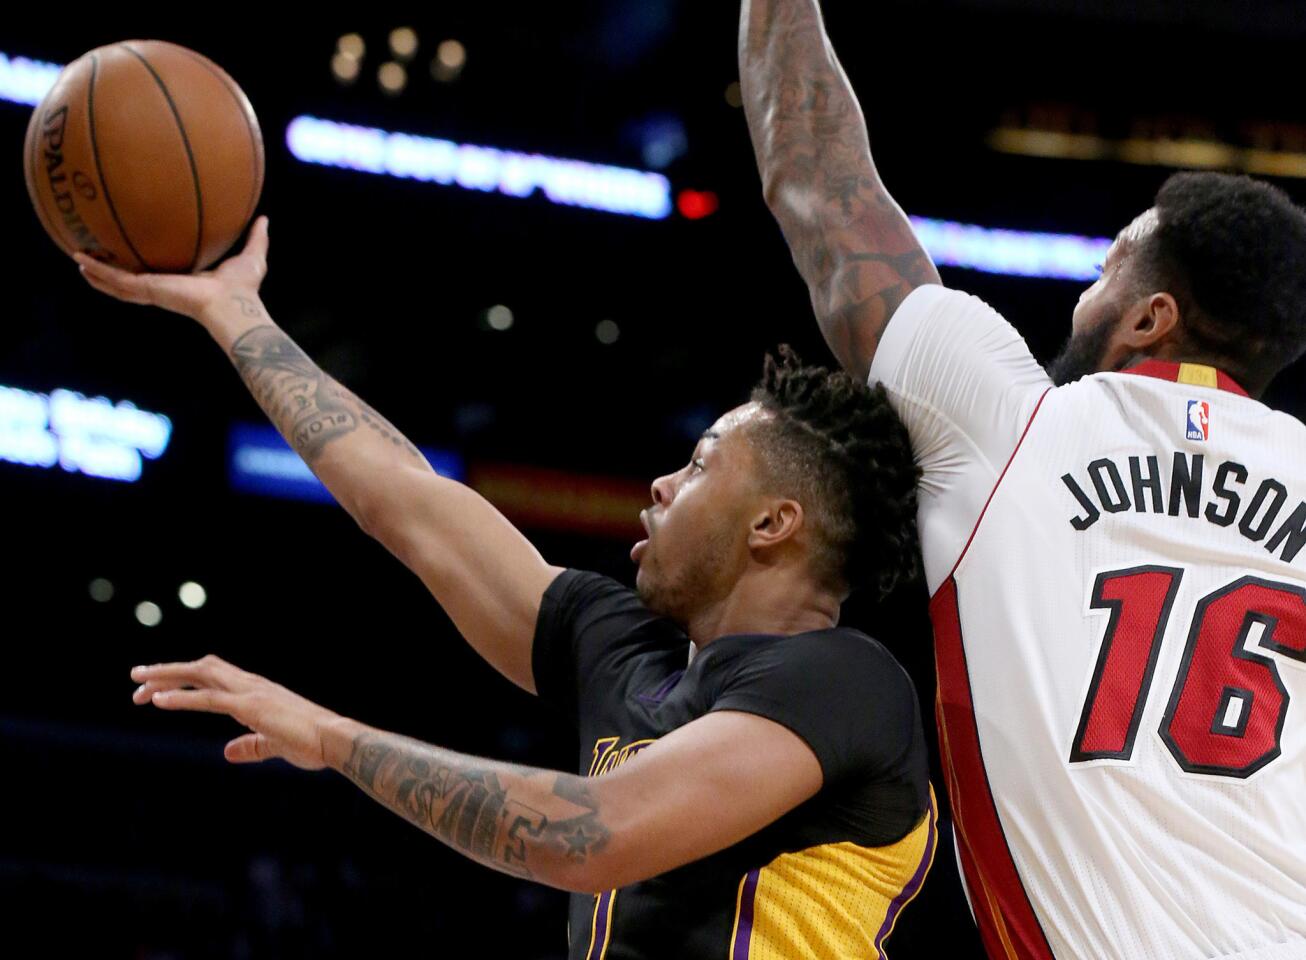 D'Angelo Russell, James Johnson